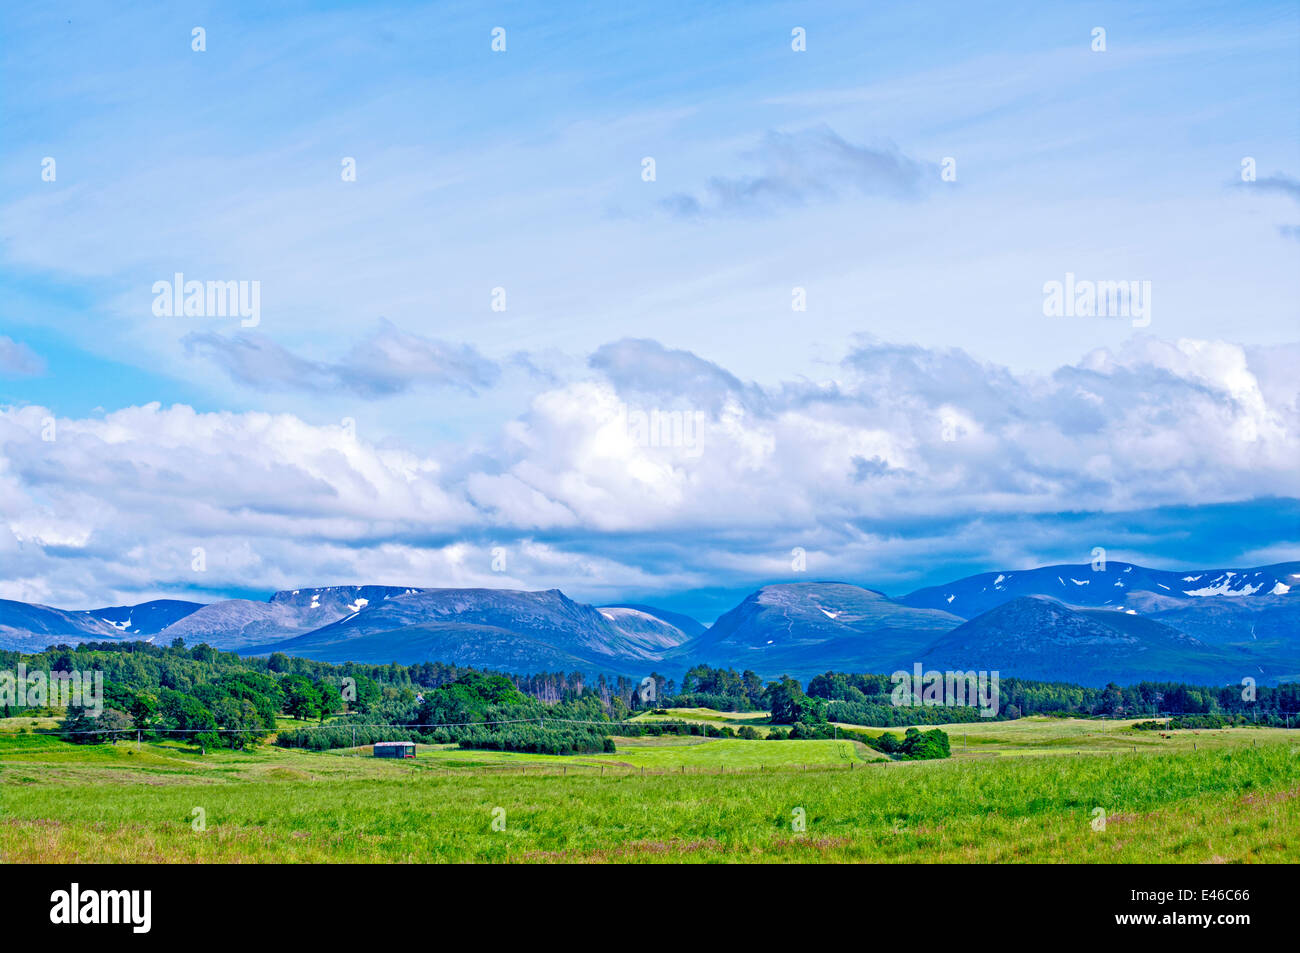 The Lairig Ghru mountain pass and Cairngorm plateau seen across the Rothiemurchus estate, near Aviemore, Cairngorms, Scotland Stock Photo